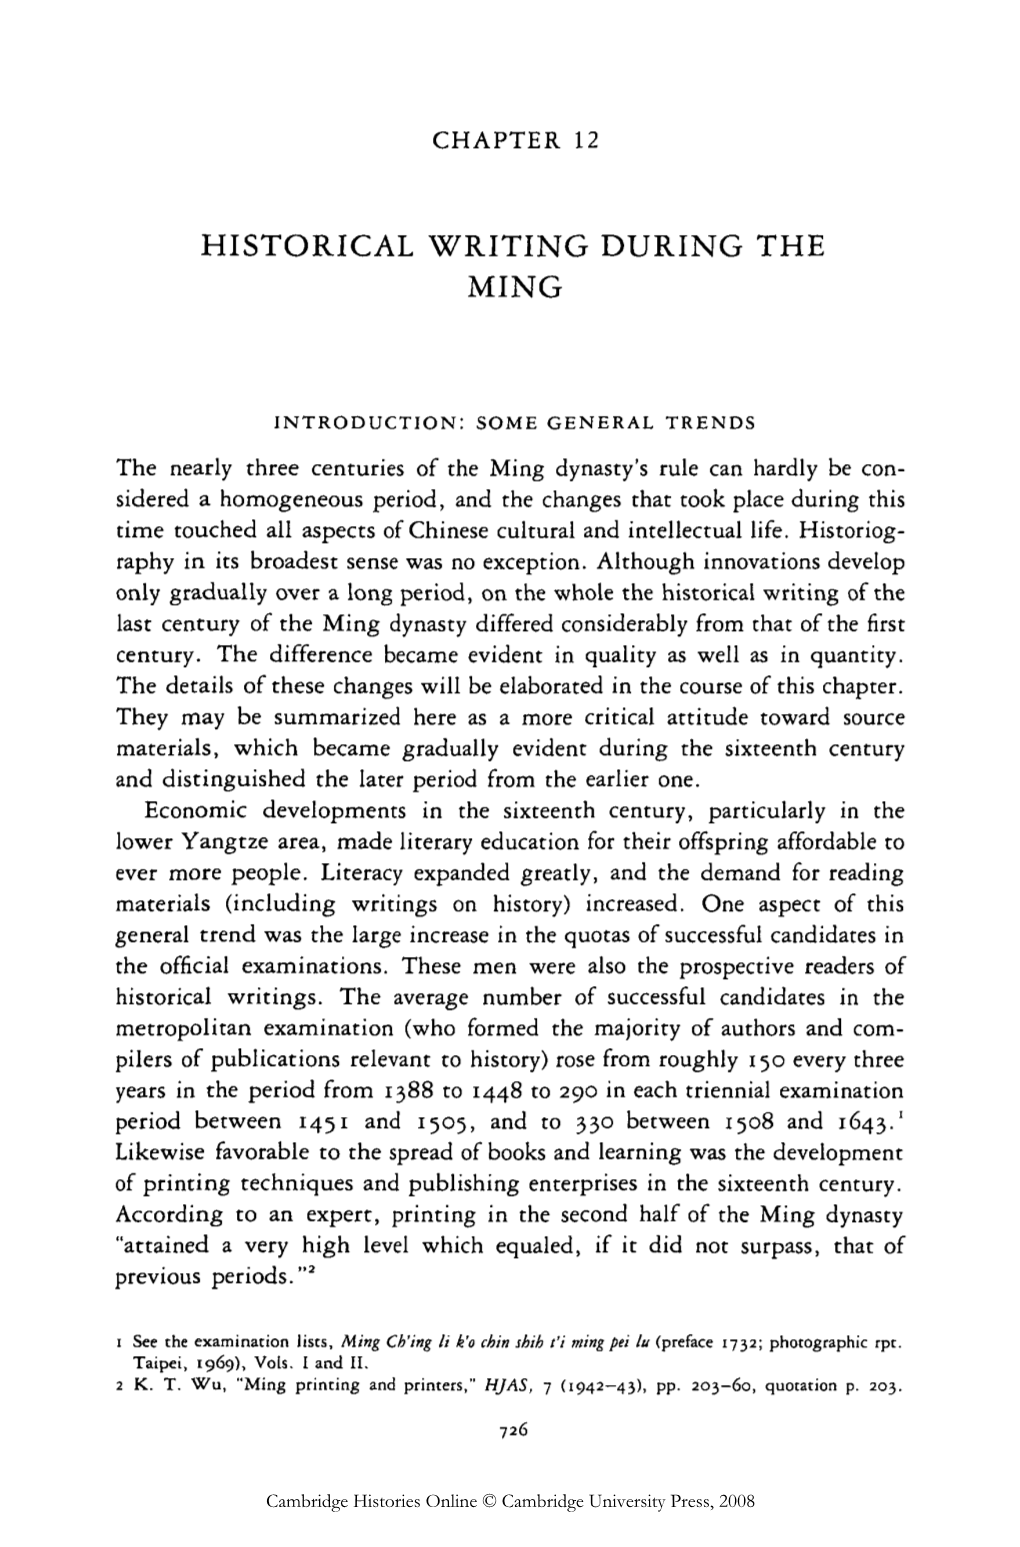 Historical Writing During the Ming